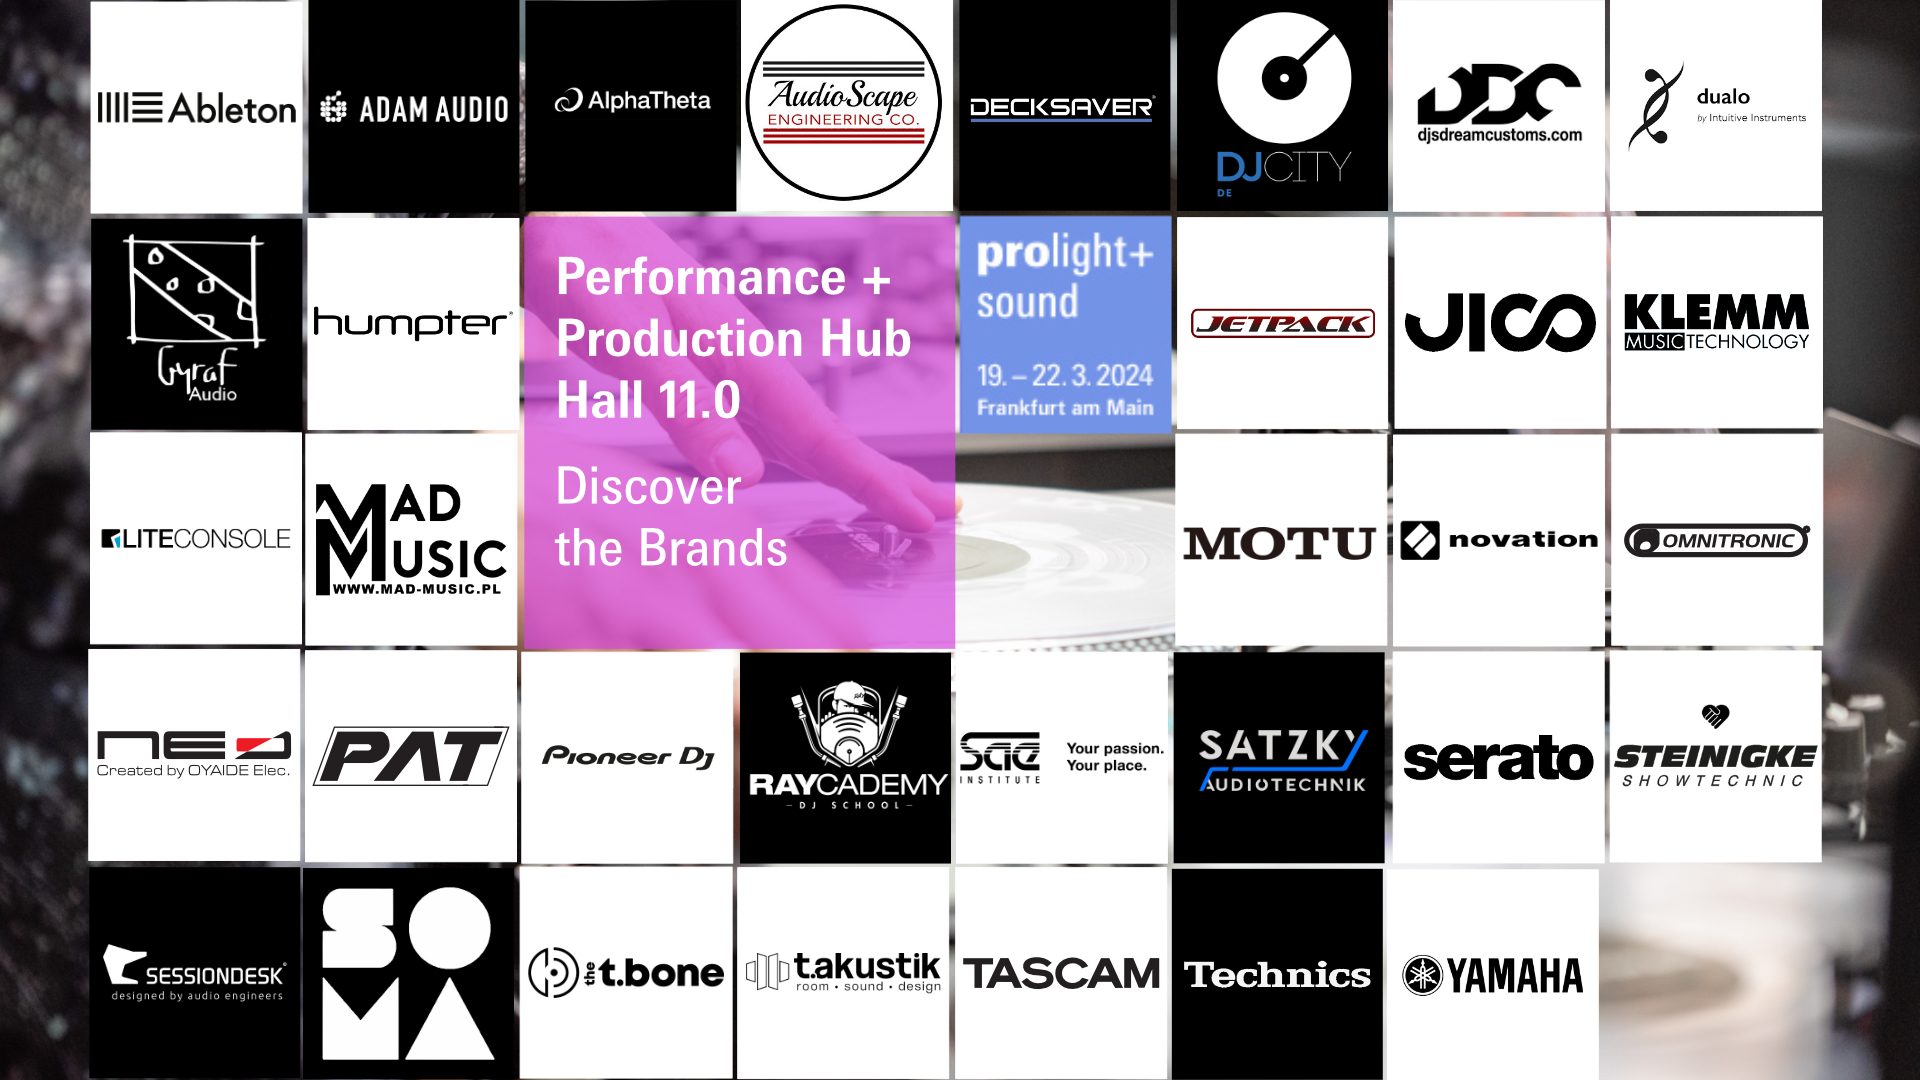 Logos of the exhibitors of the Performance + Production Hub